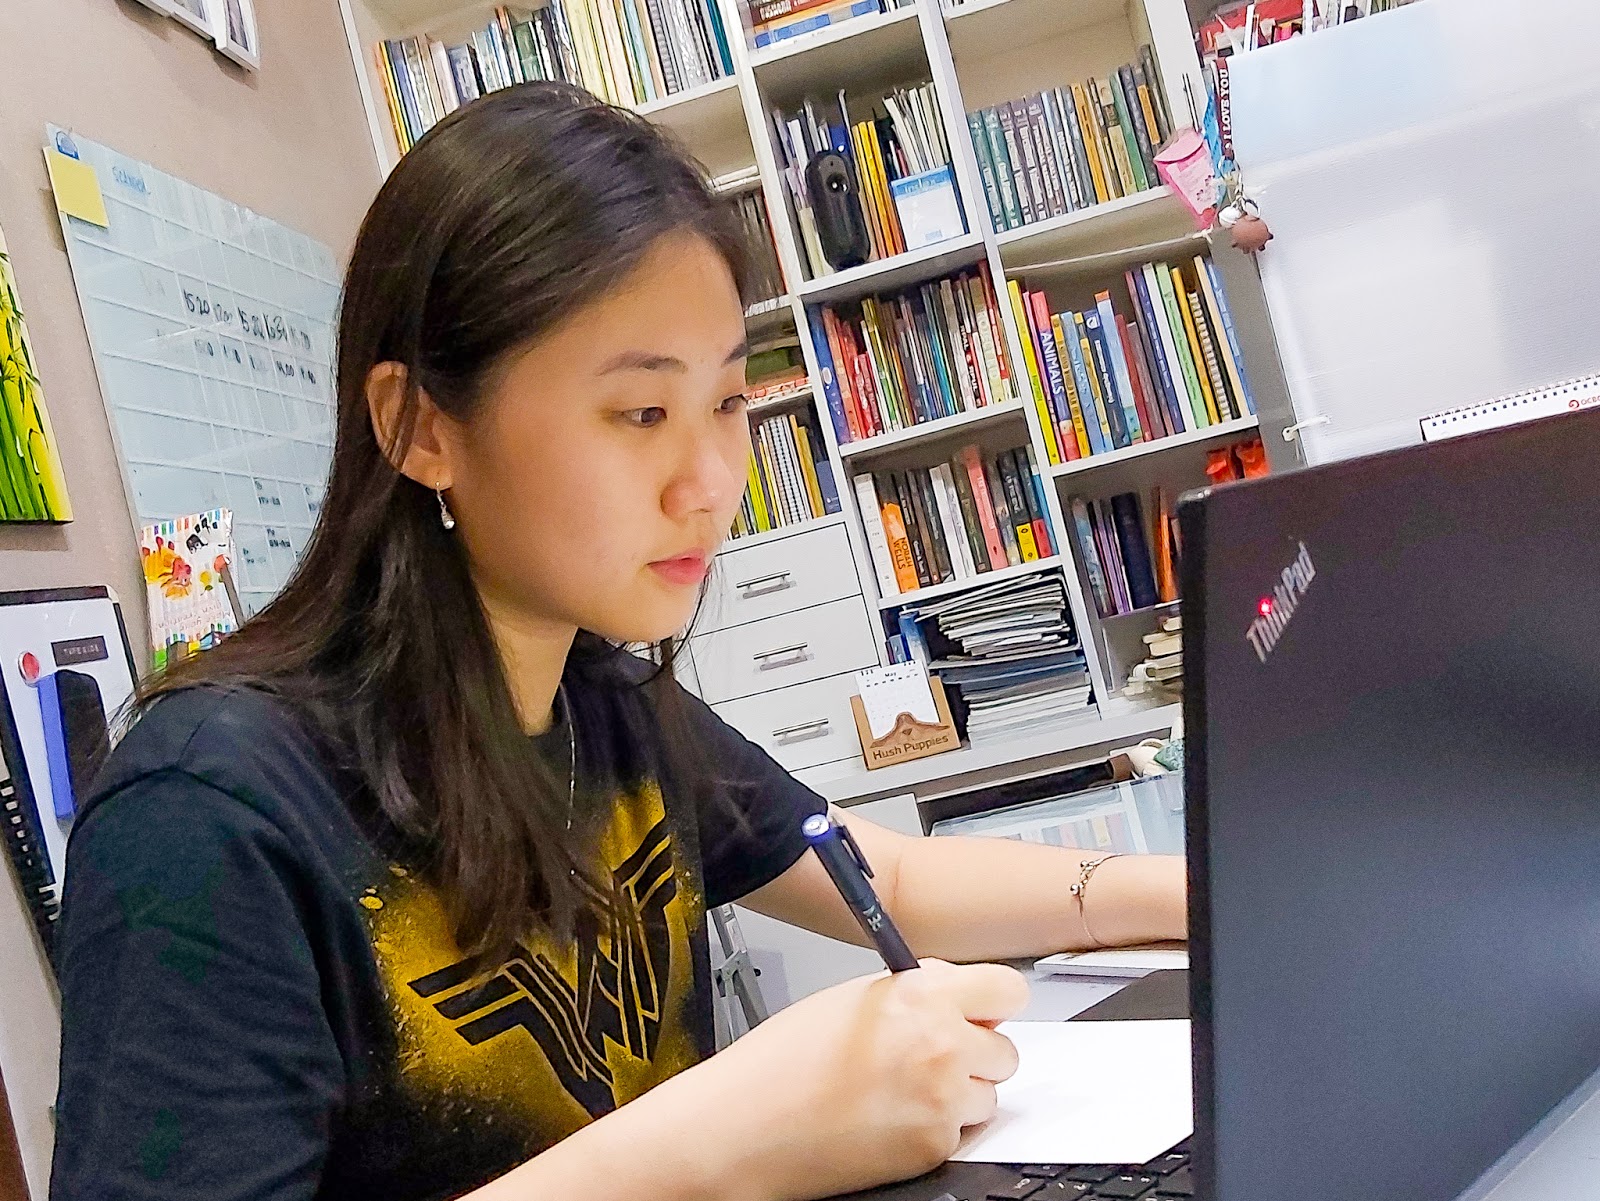 Vionna Fiducia, a student at Xi’an Jiaotong-Liverpool University, studying at her home in Indonesia